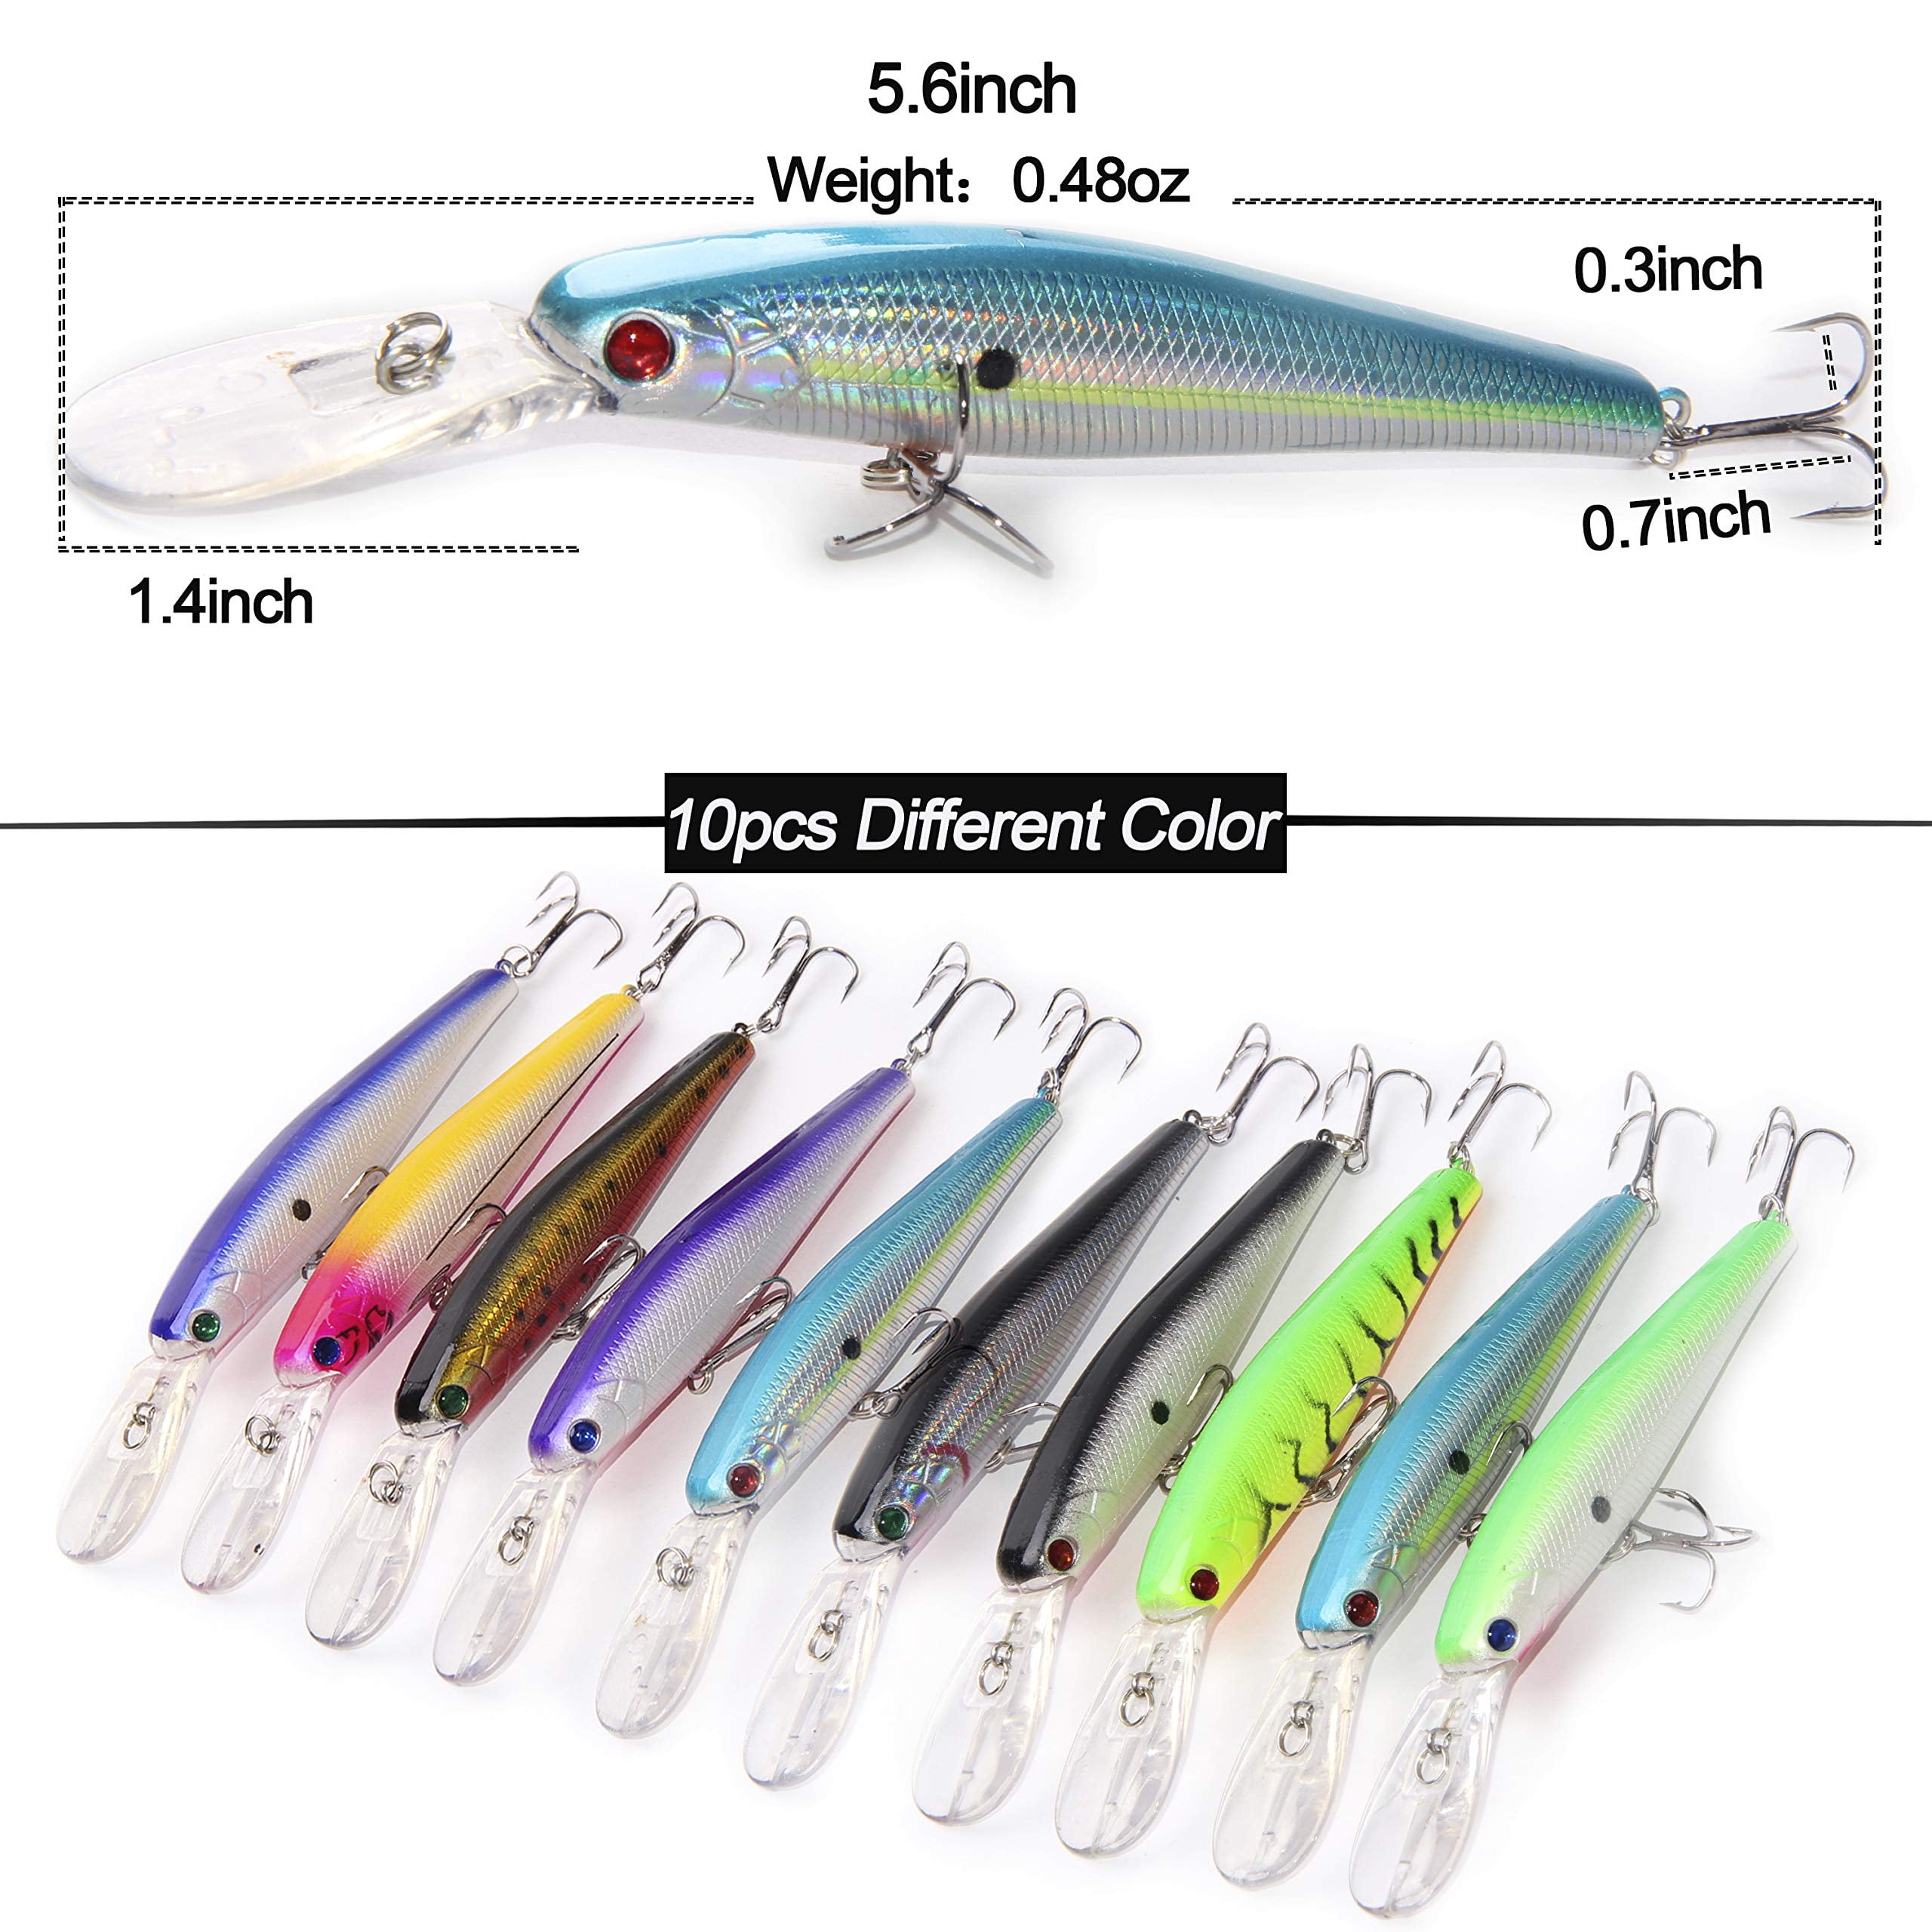 Bass Fishing Lures Kit, Minnow CrankBait VIB Pencil Popper Sinking Wobbler  Hard Bait Topwater Lures for Bass Trout Walleye Redfish Freshwater